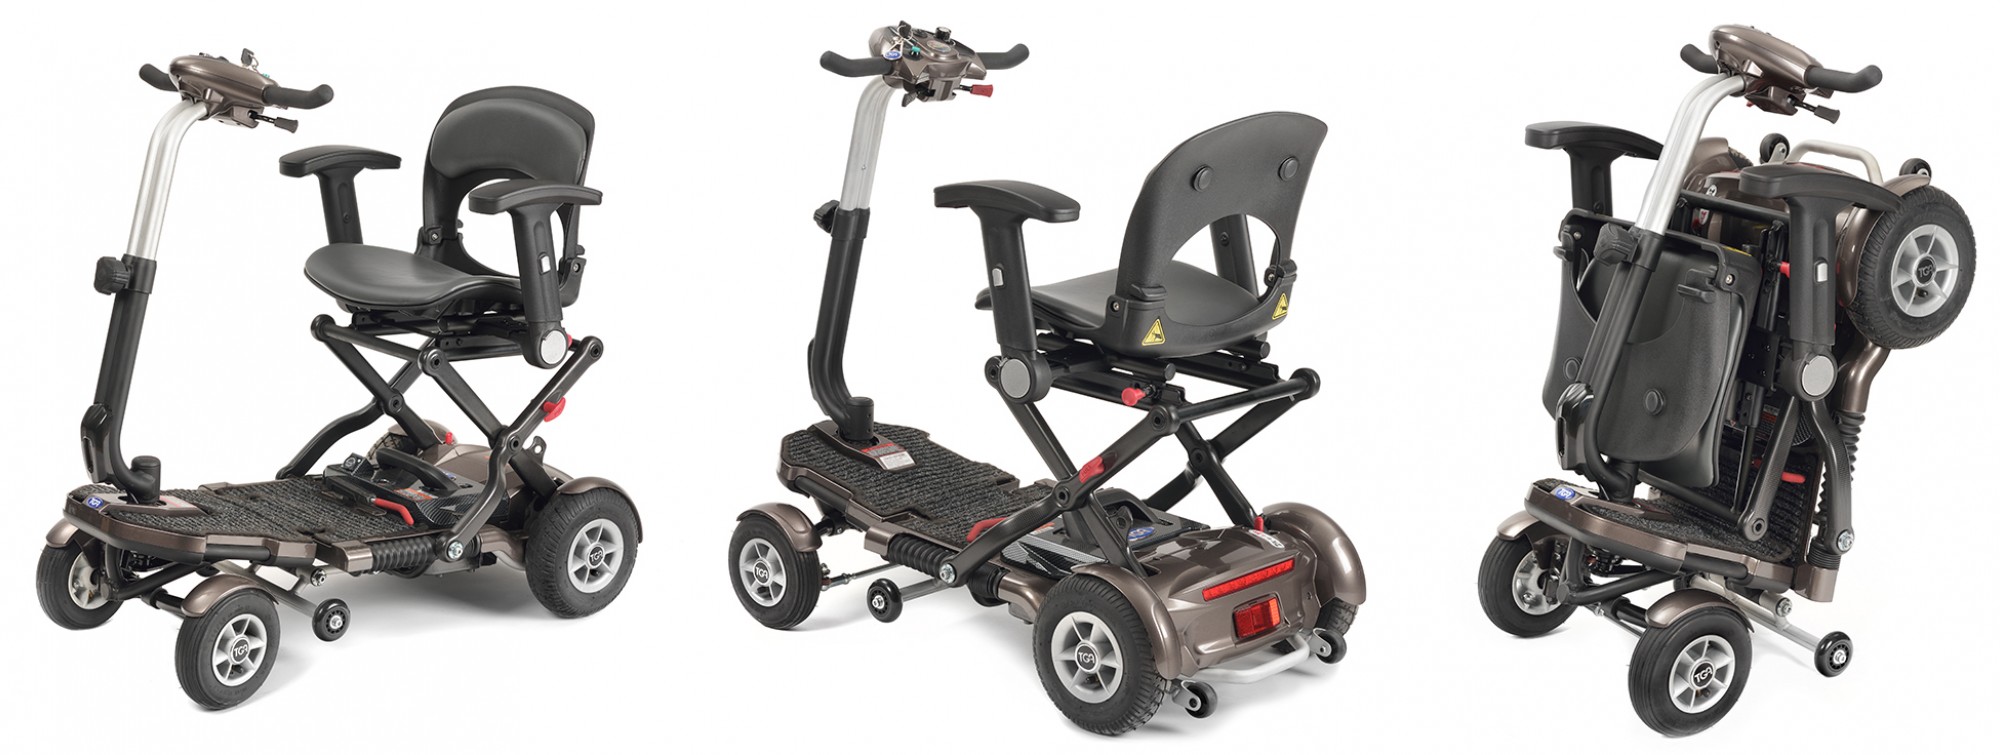 New range of folding mobility scooters from TGA